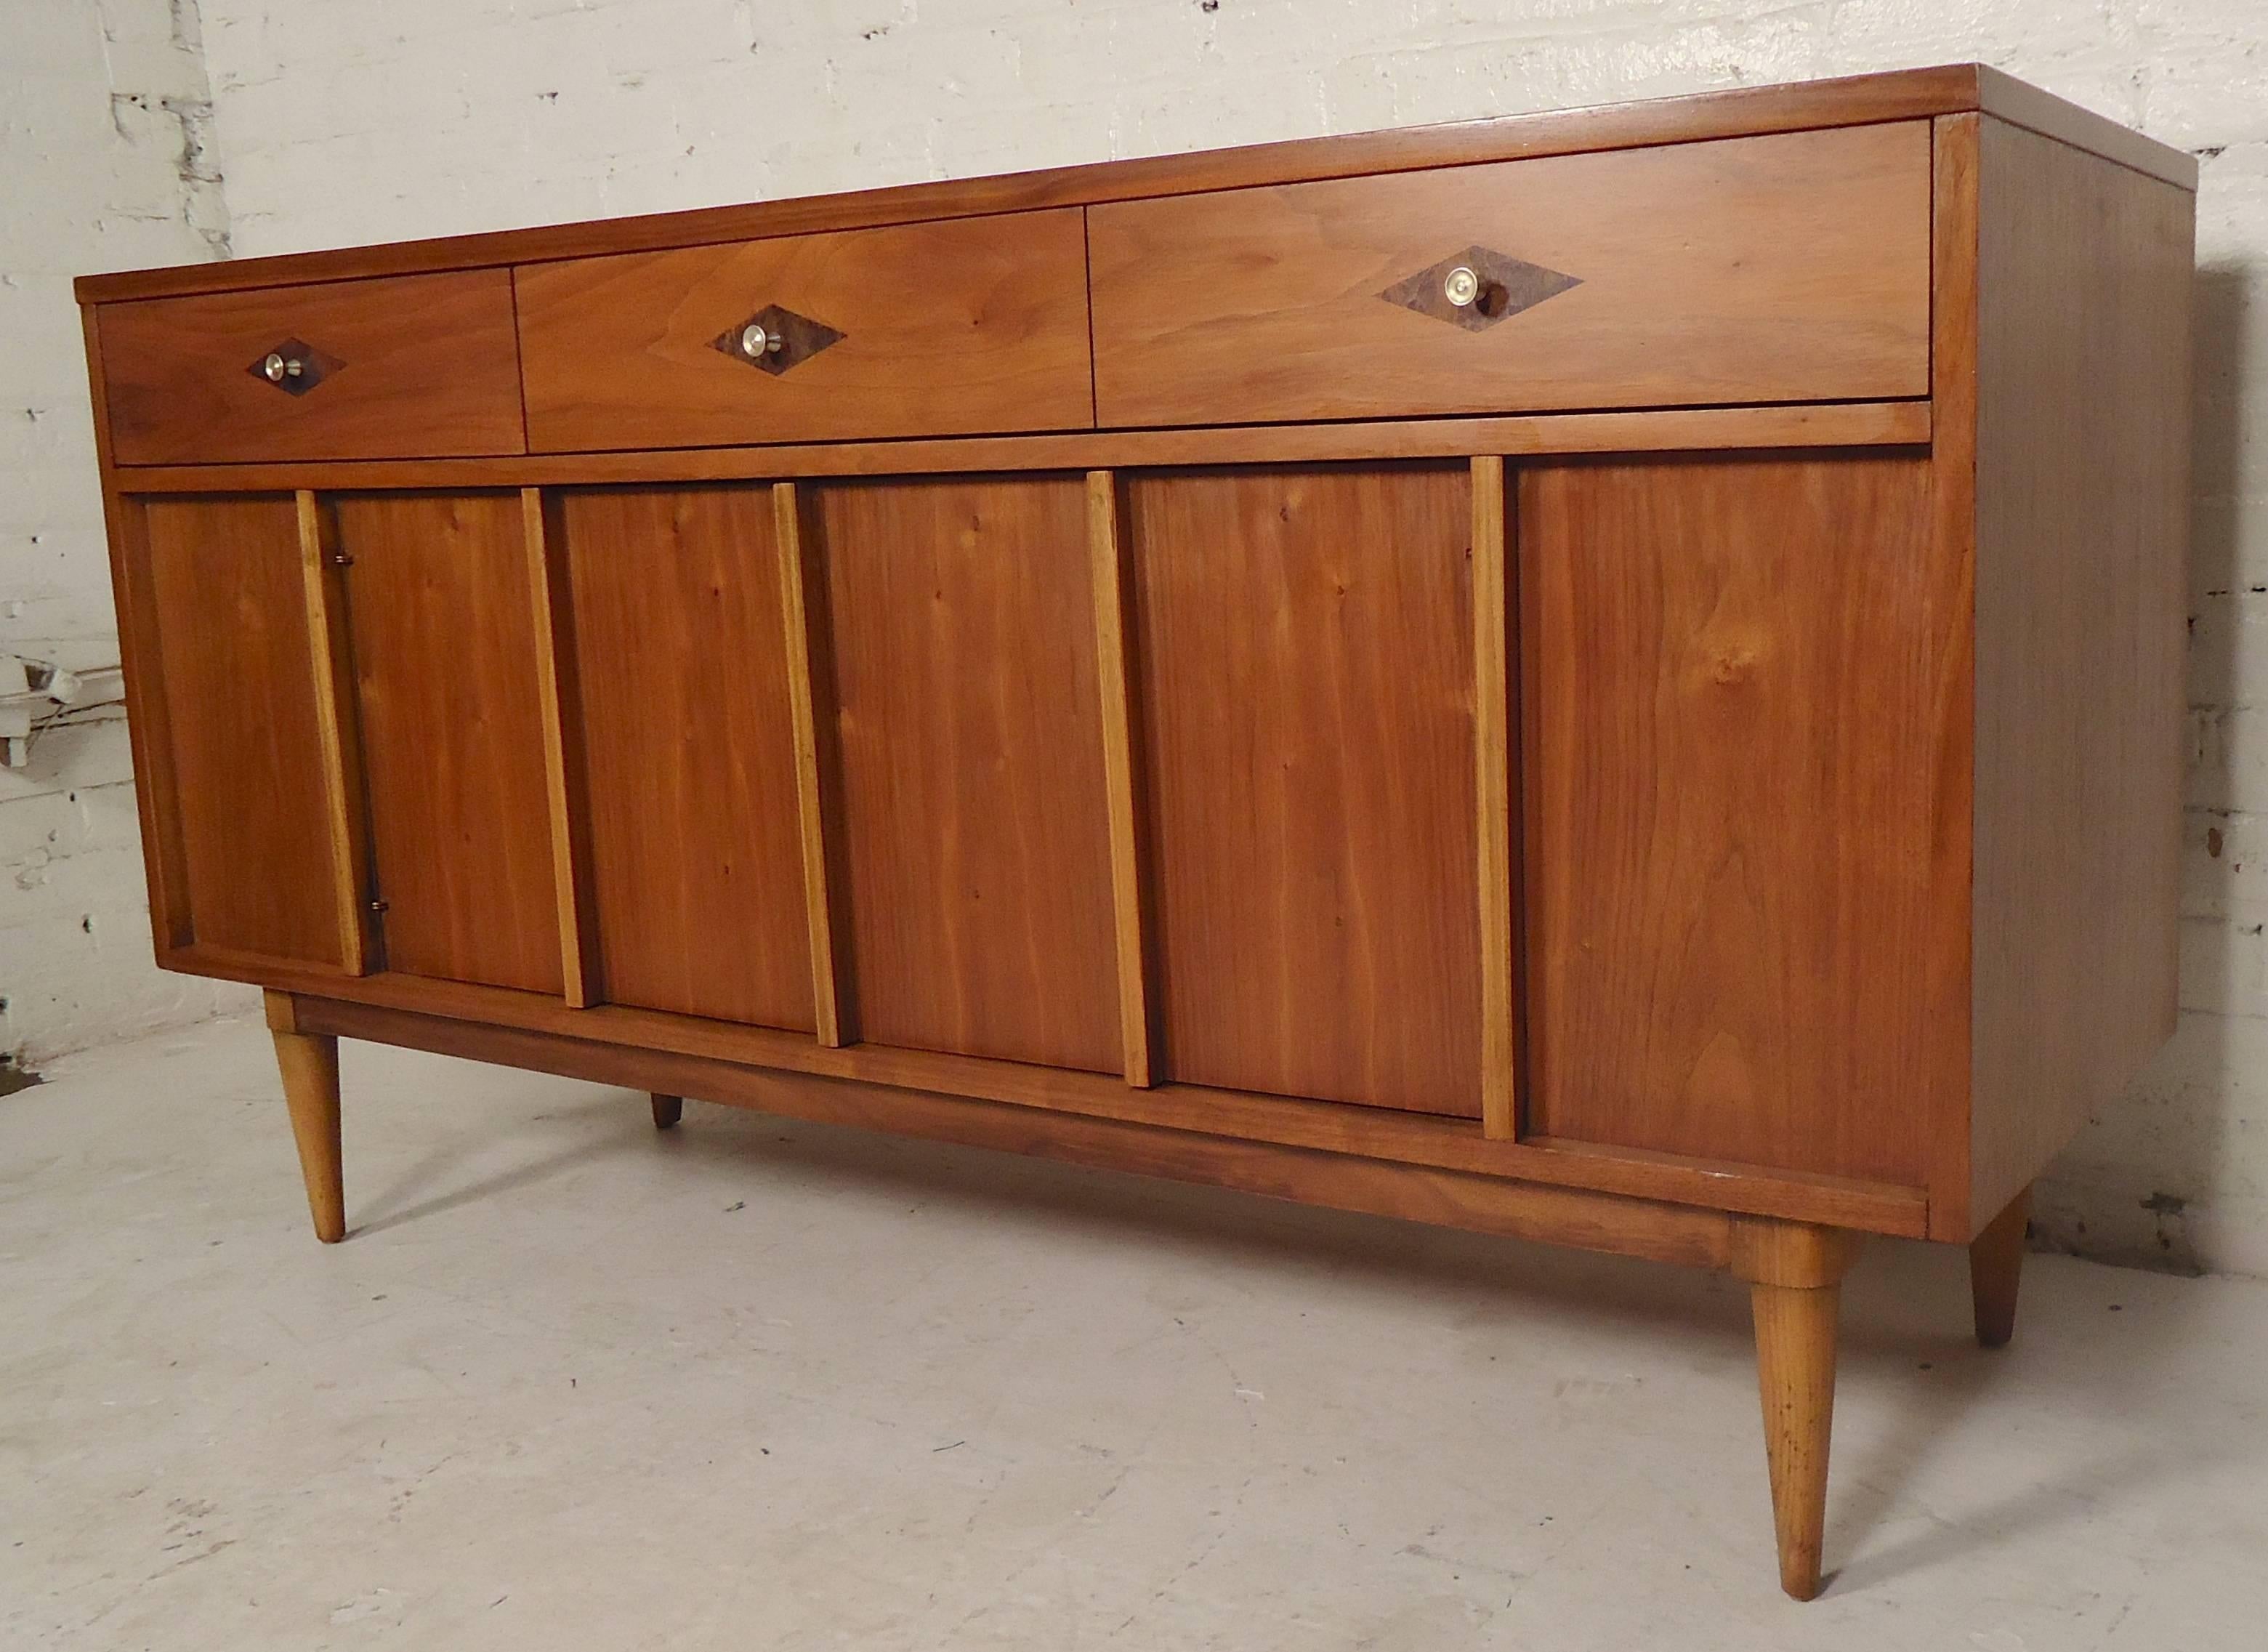 Restored vintage modern credenza with drawer and cabinet storage. Walnut grain with accenting rosewood diamond shaped inlay.

(Please confirm item location - NY or NJ - with dealer).
   